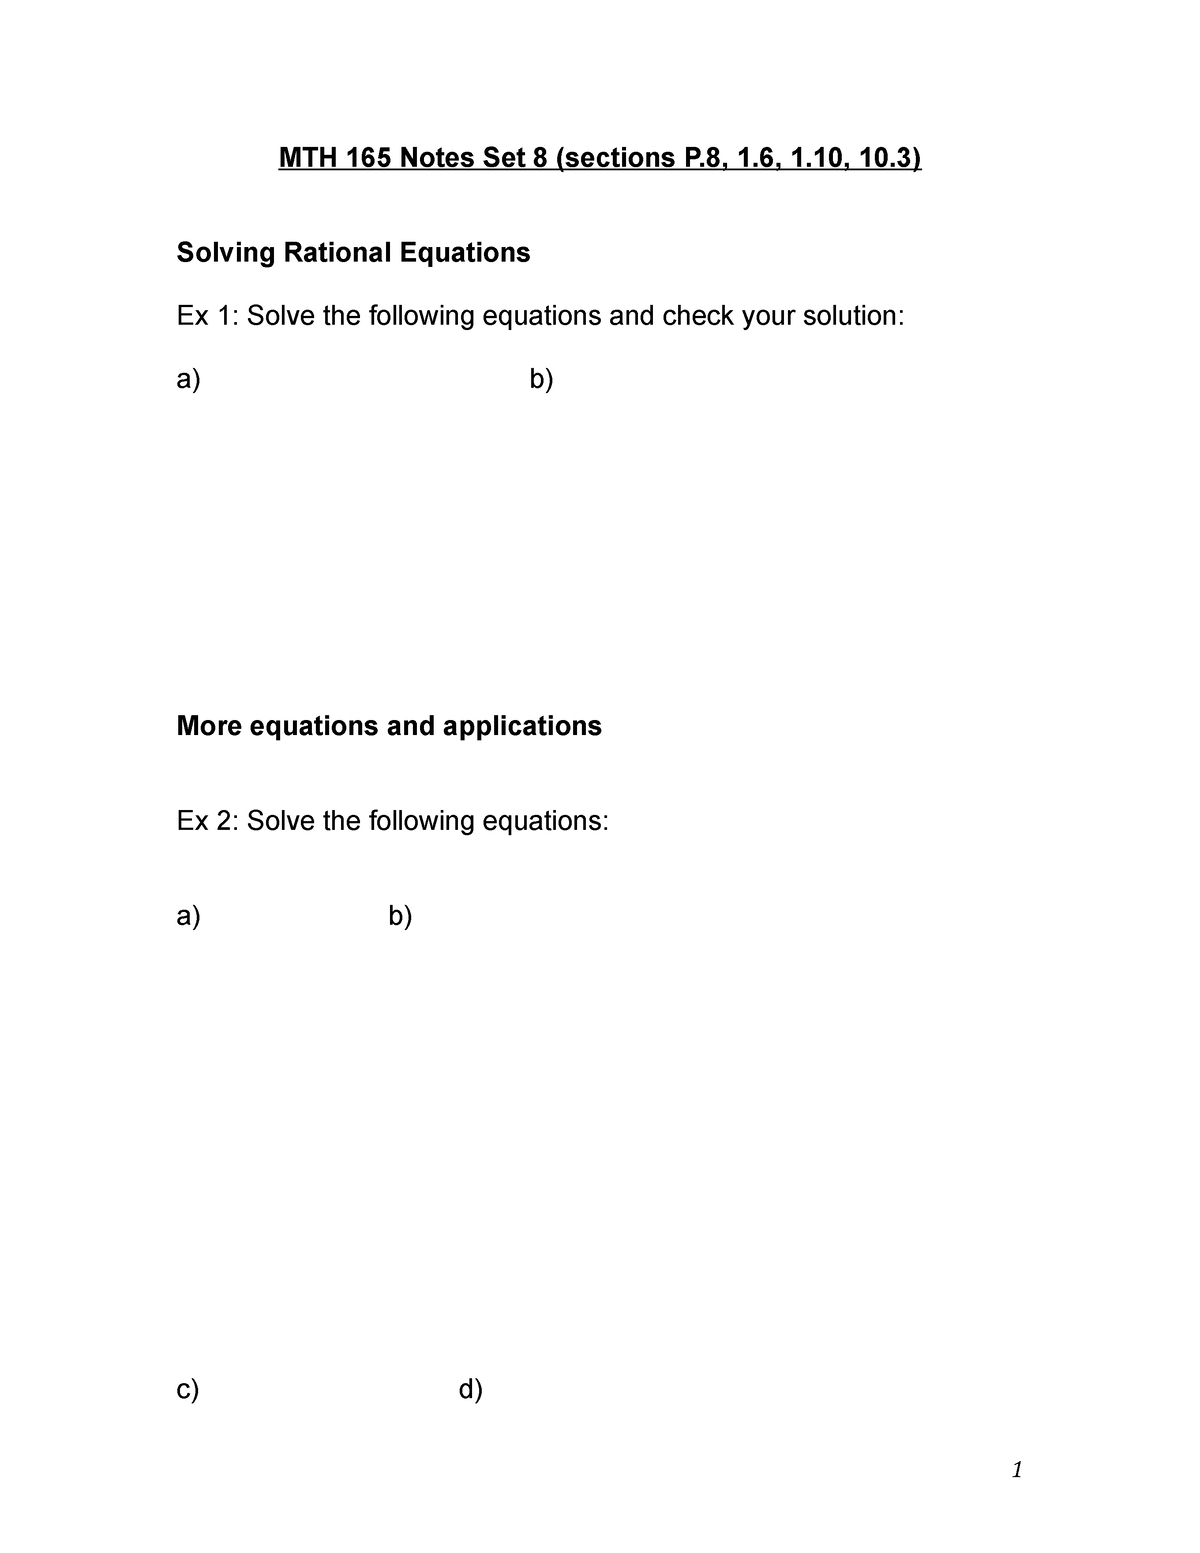 solving-rational-equations-mth-165-notes-set-8-sections-p-1-1-10